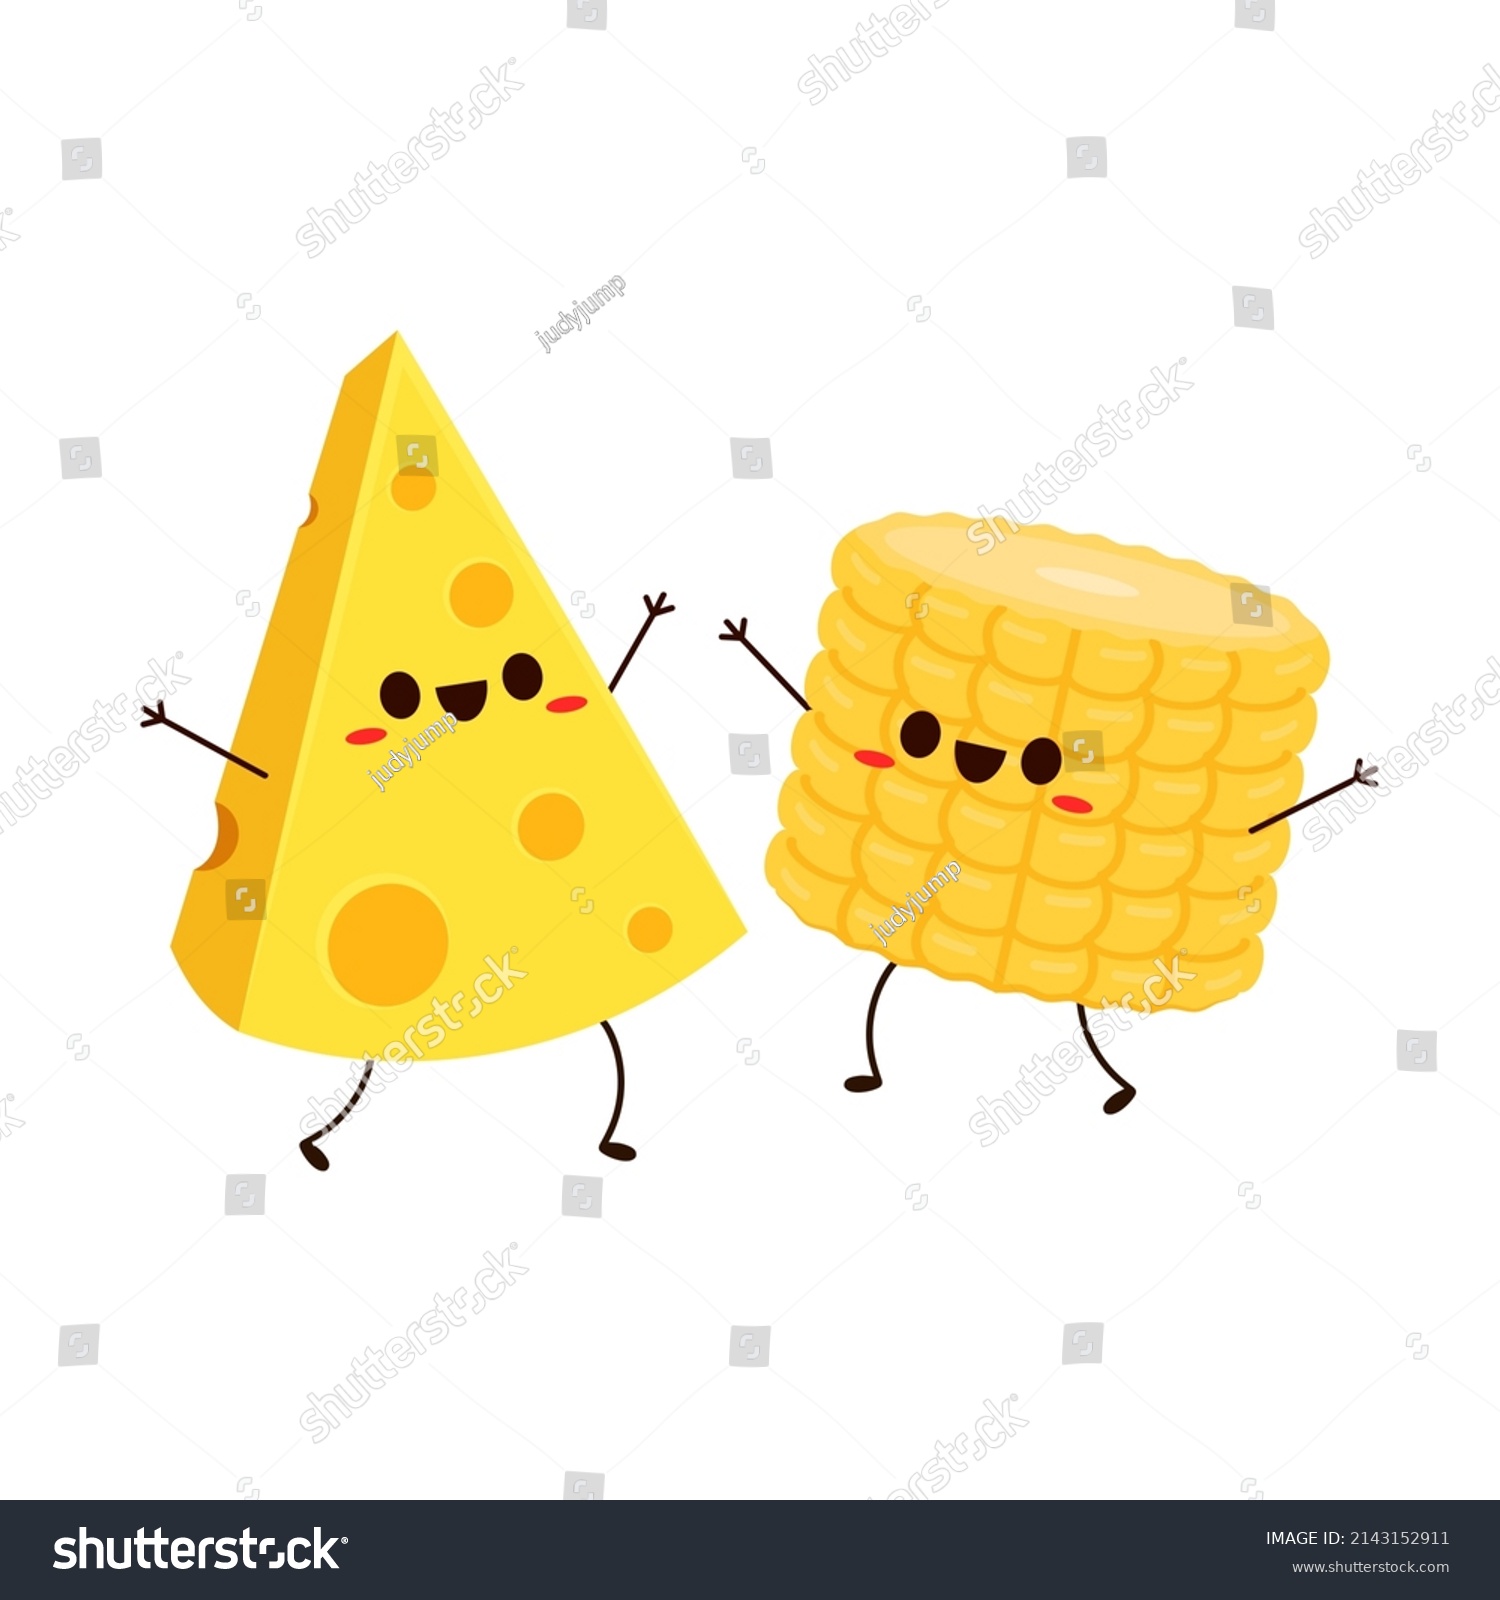 SVG of Corn and Cheese vector. Corn and Cheese character design. Corn on white background. svg